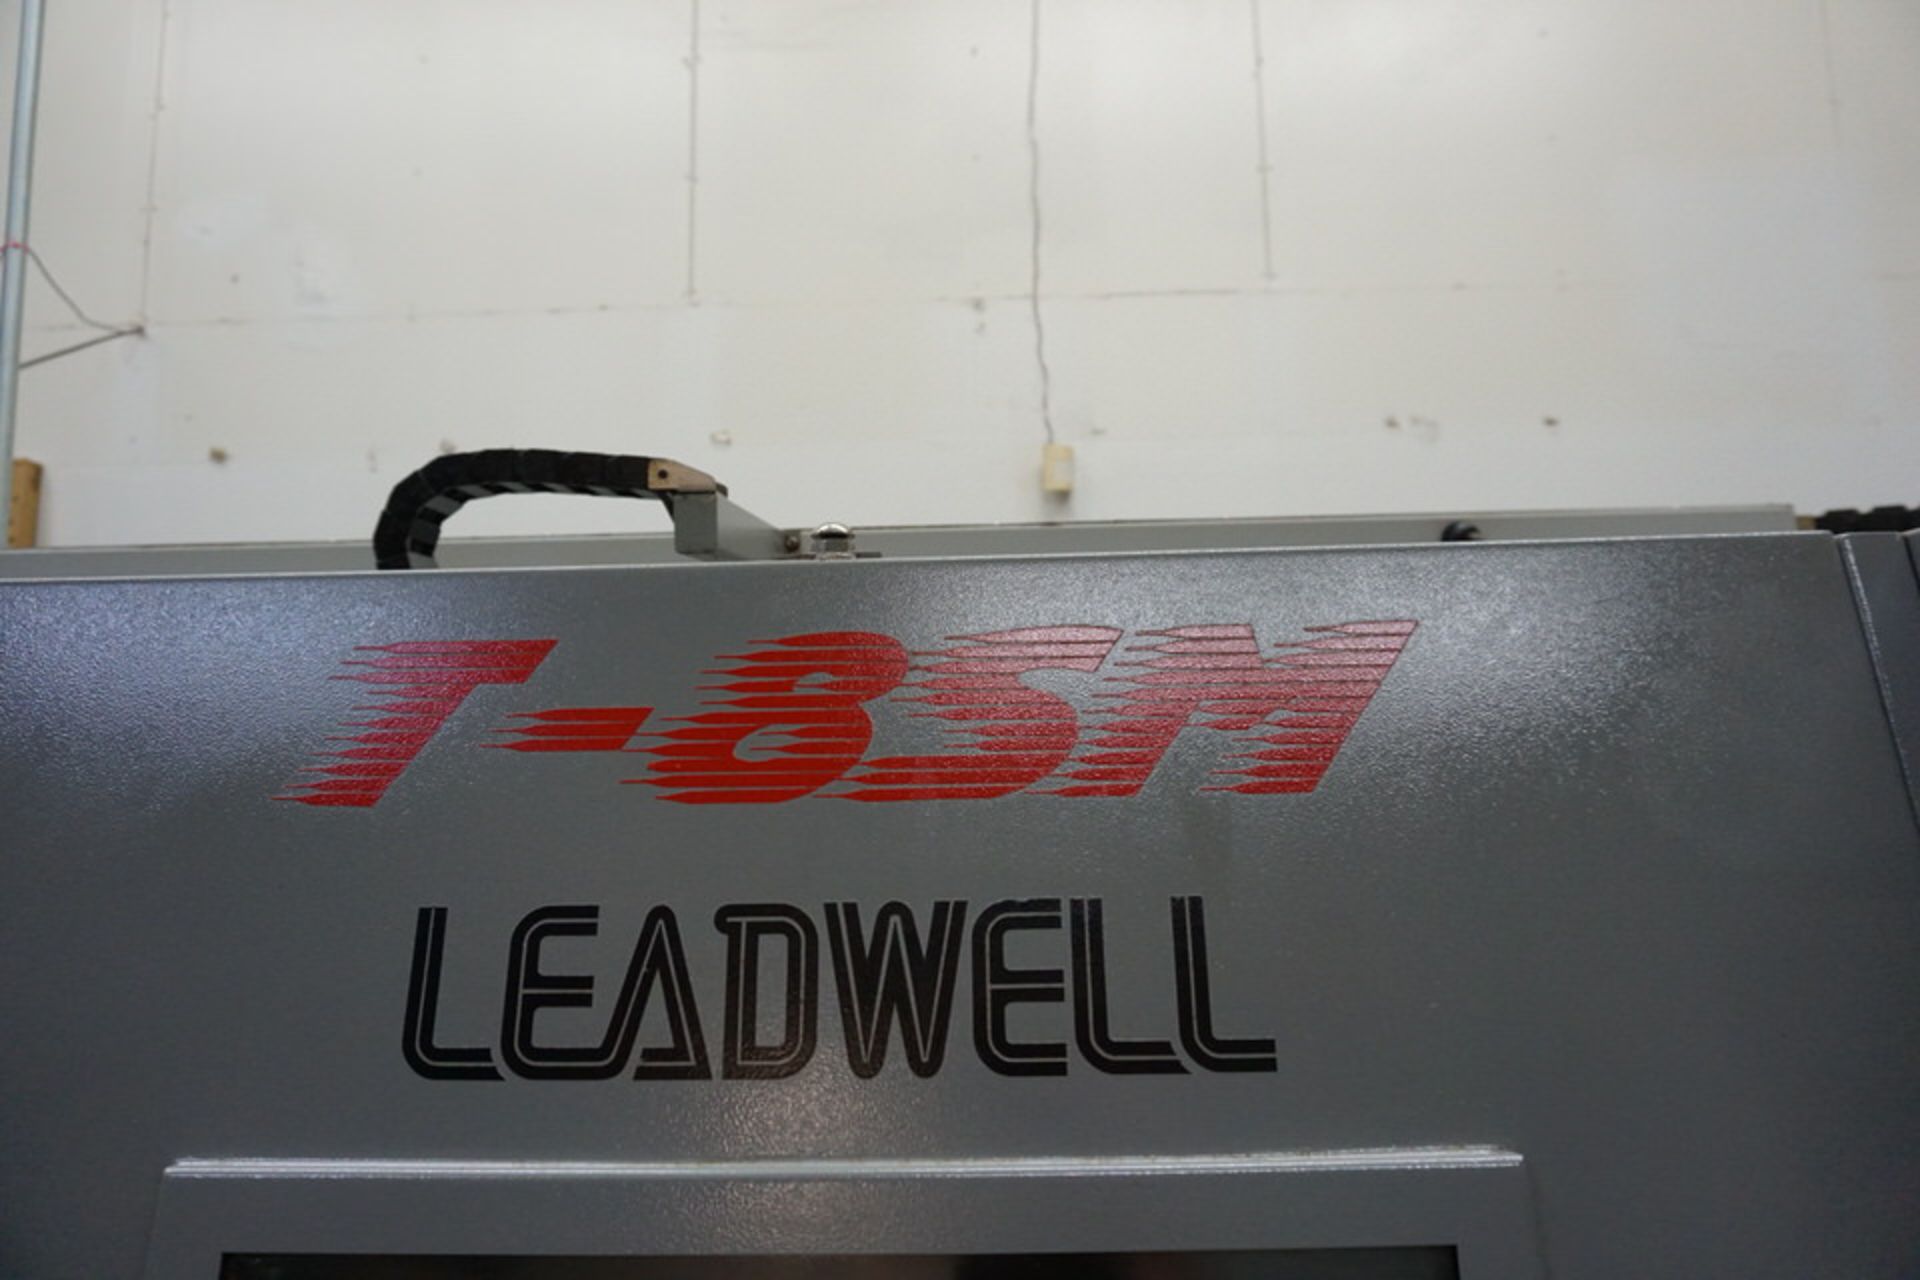 LEADWELL T-8SM CNC LATHE, 5 AXIS, FANUC 18-I TB CONTROL, FULL AXIS ON BOTH SPINDLES, 12 POSITION - Image 3 of 12